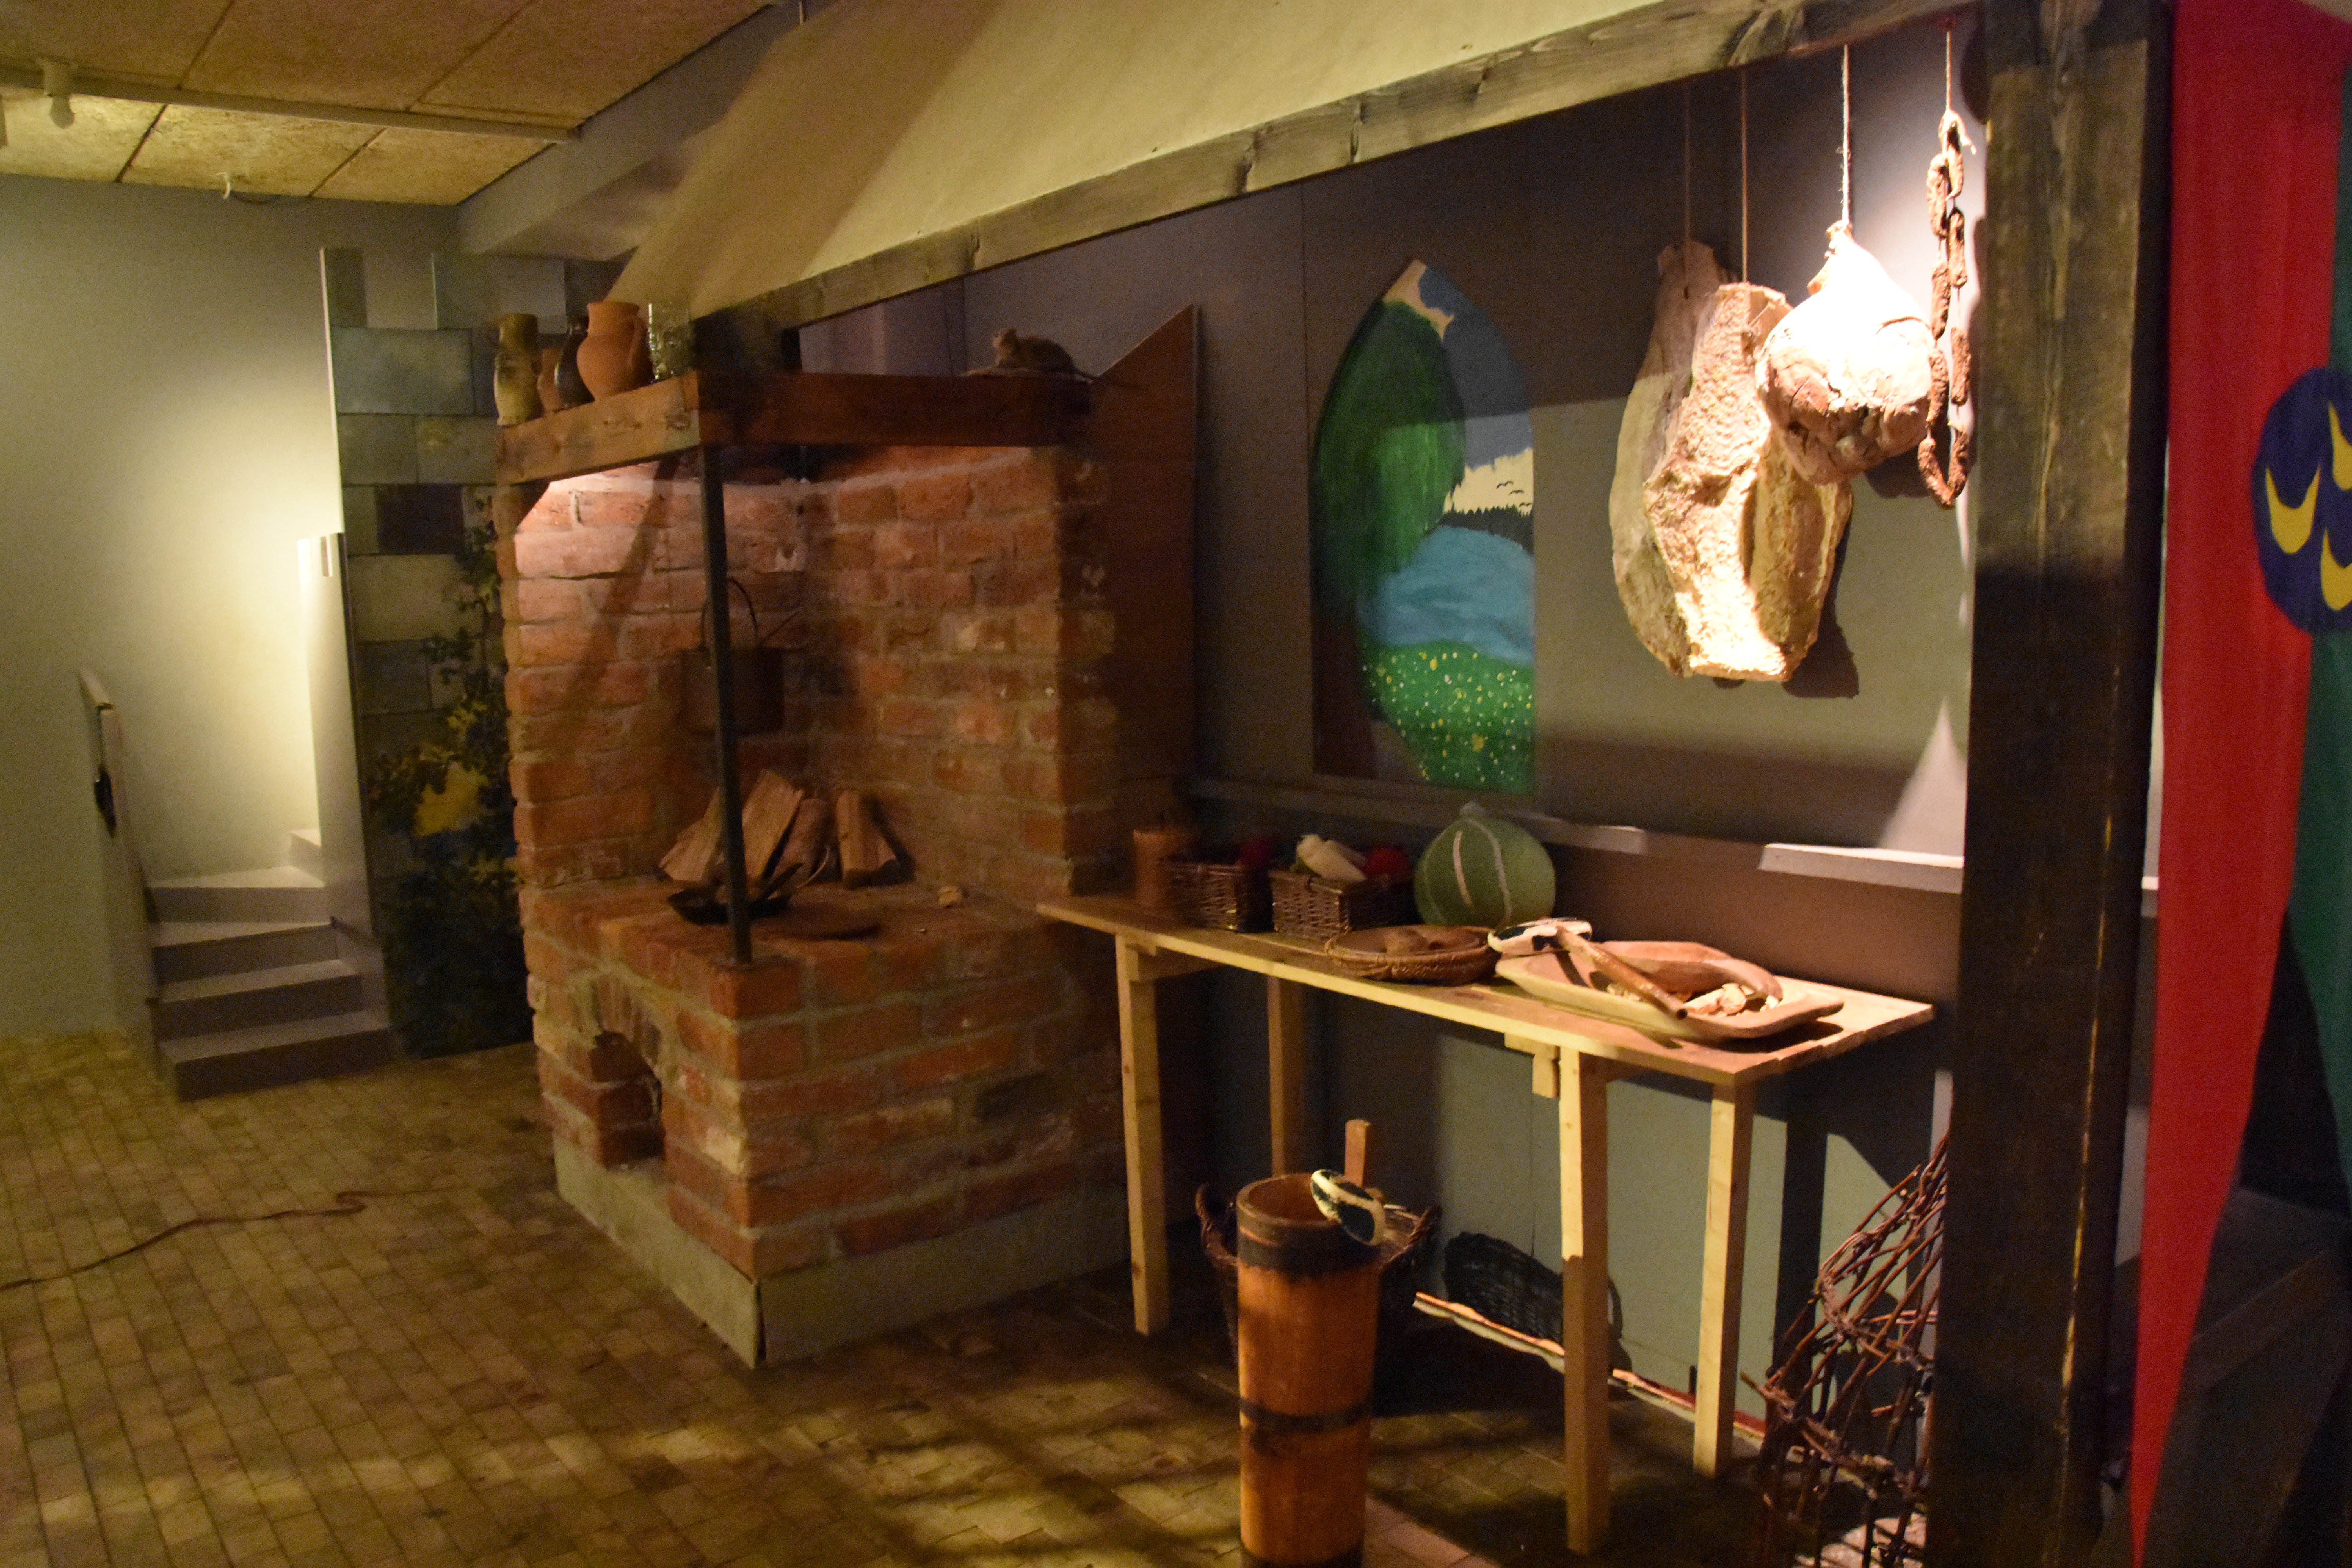 Pretend kitchen inside the play "castle" at the Ribe Viking Museum in Ribe, Denmark